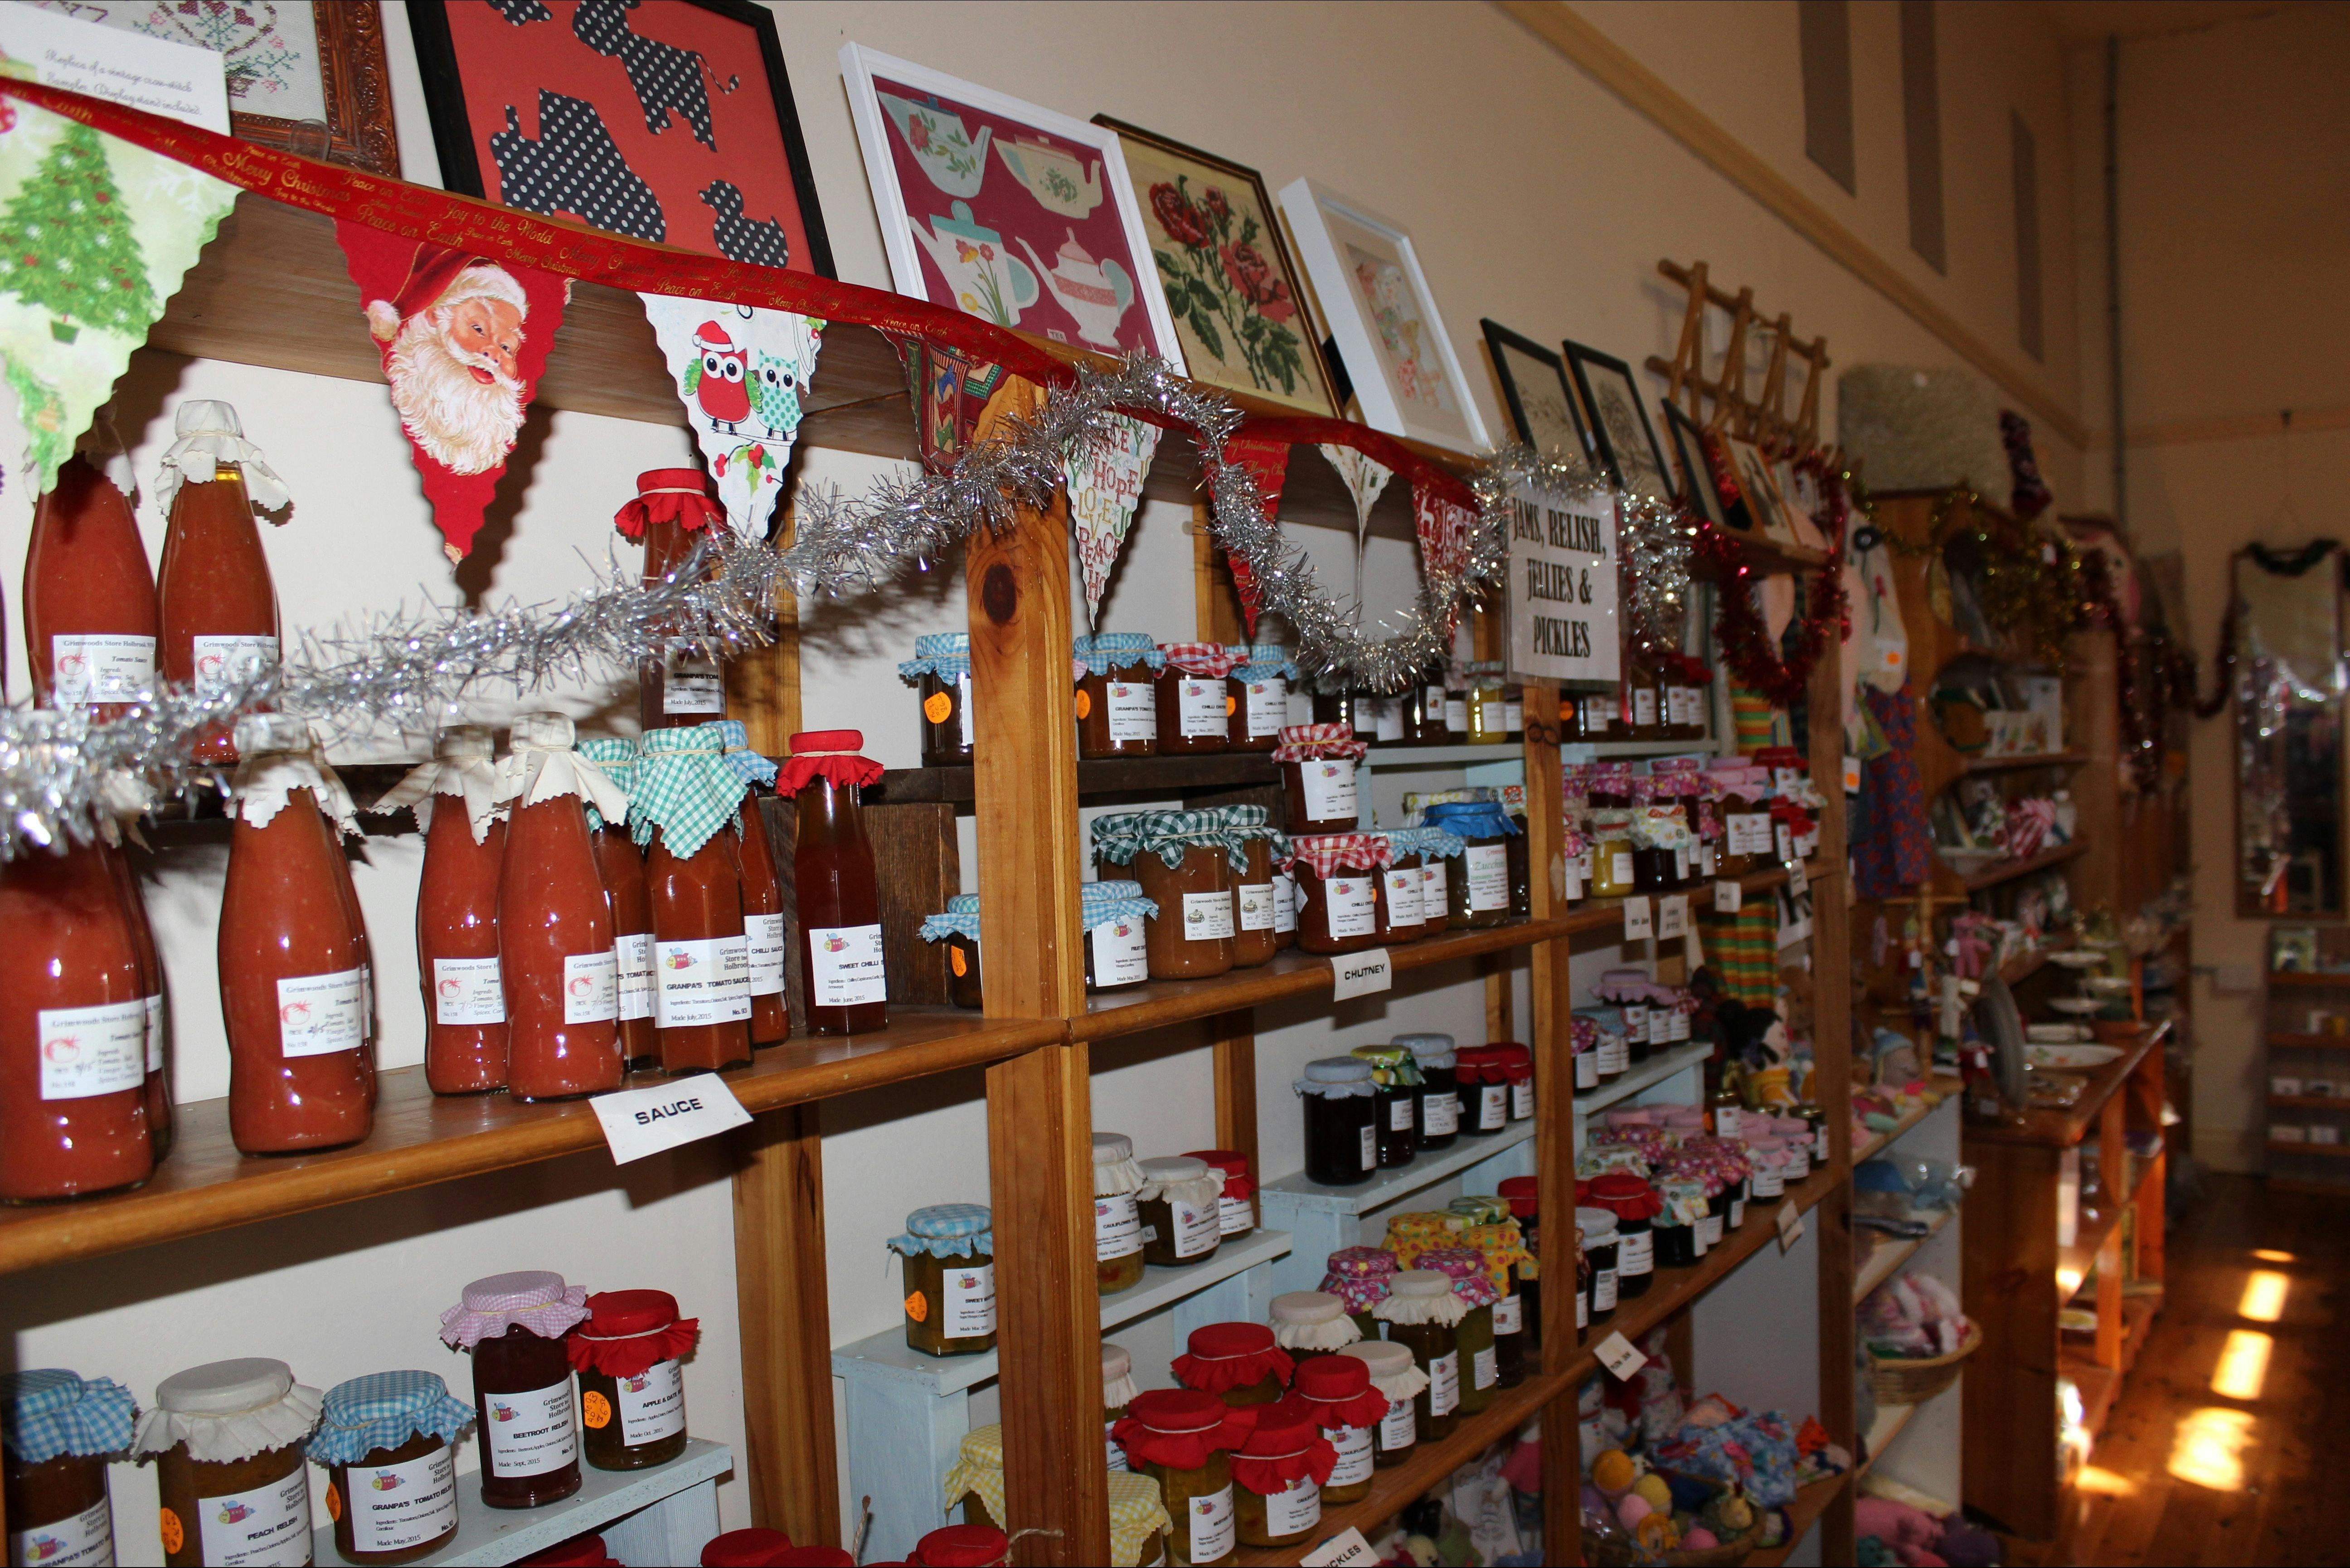 Grimwoods Store Craft Shop | NSW Holidays & Accommodation, Things to Do